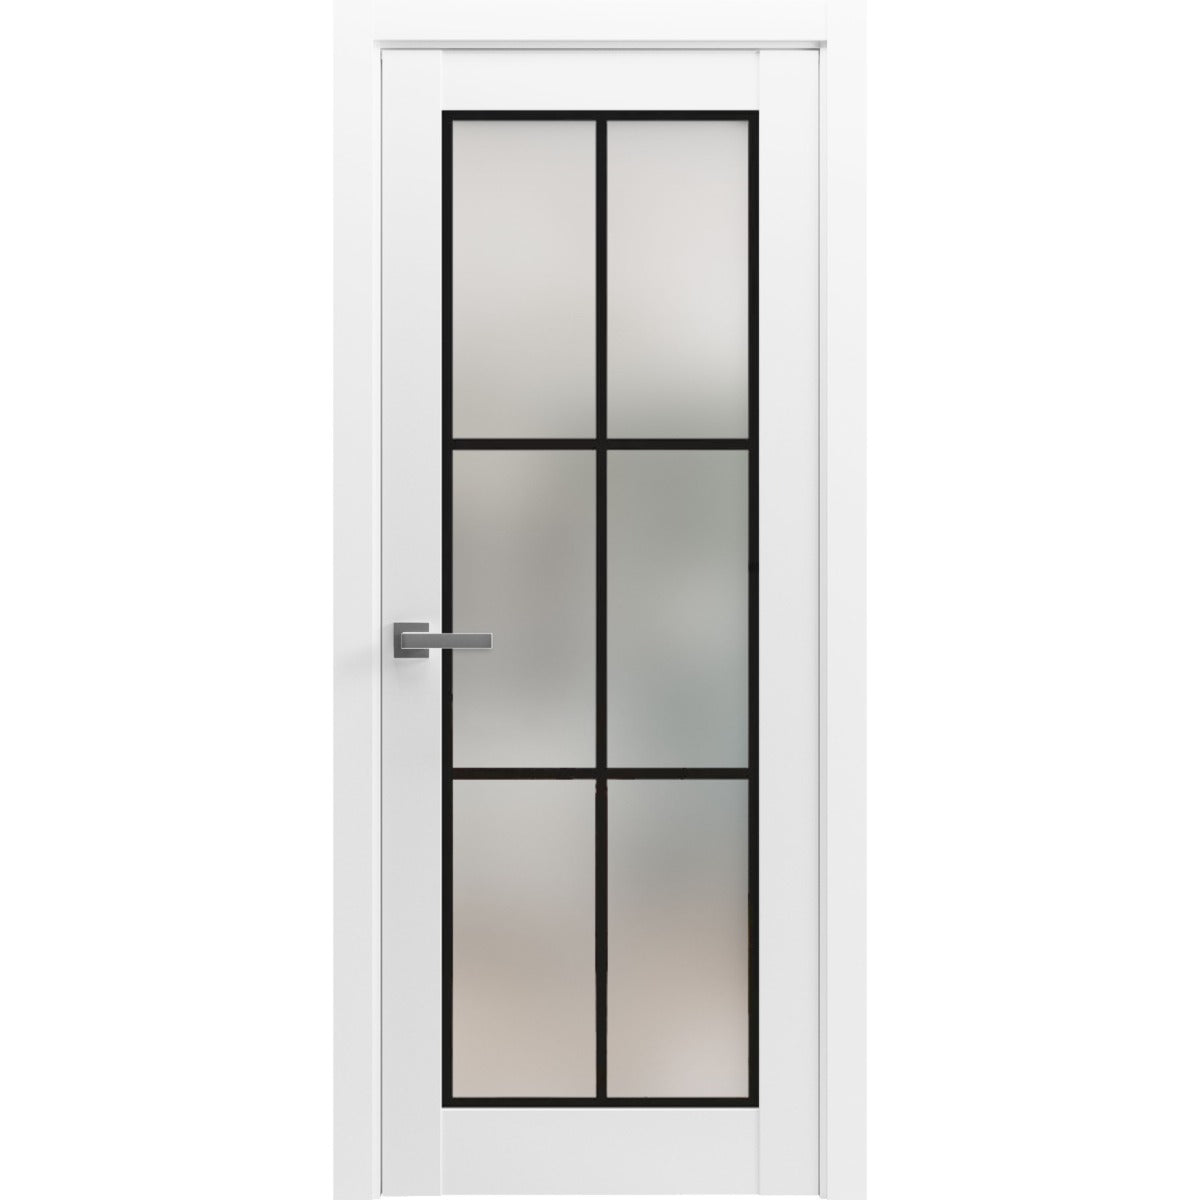 Solid French Door | Planum 2122 White Silk Frosted Glass | Single Regular Panel Frame Trims Handle | Bathroom Bedroom Sturdy Doors